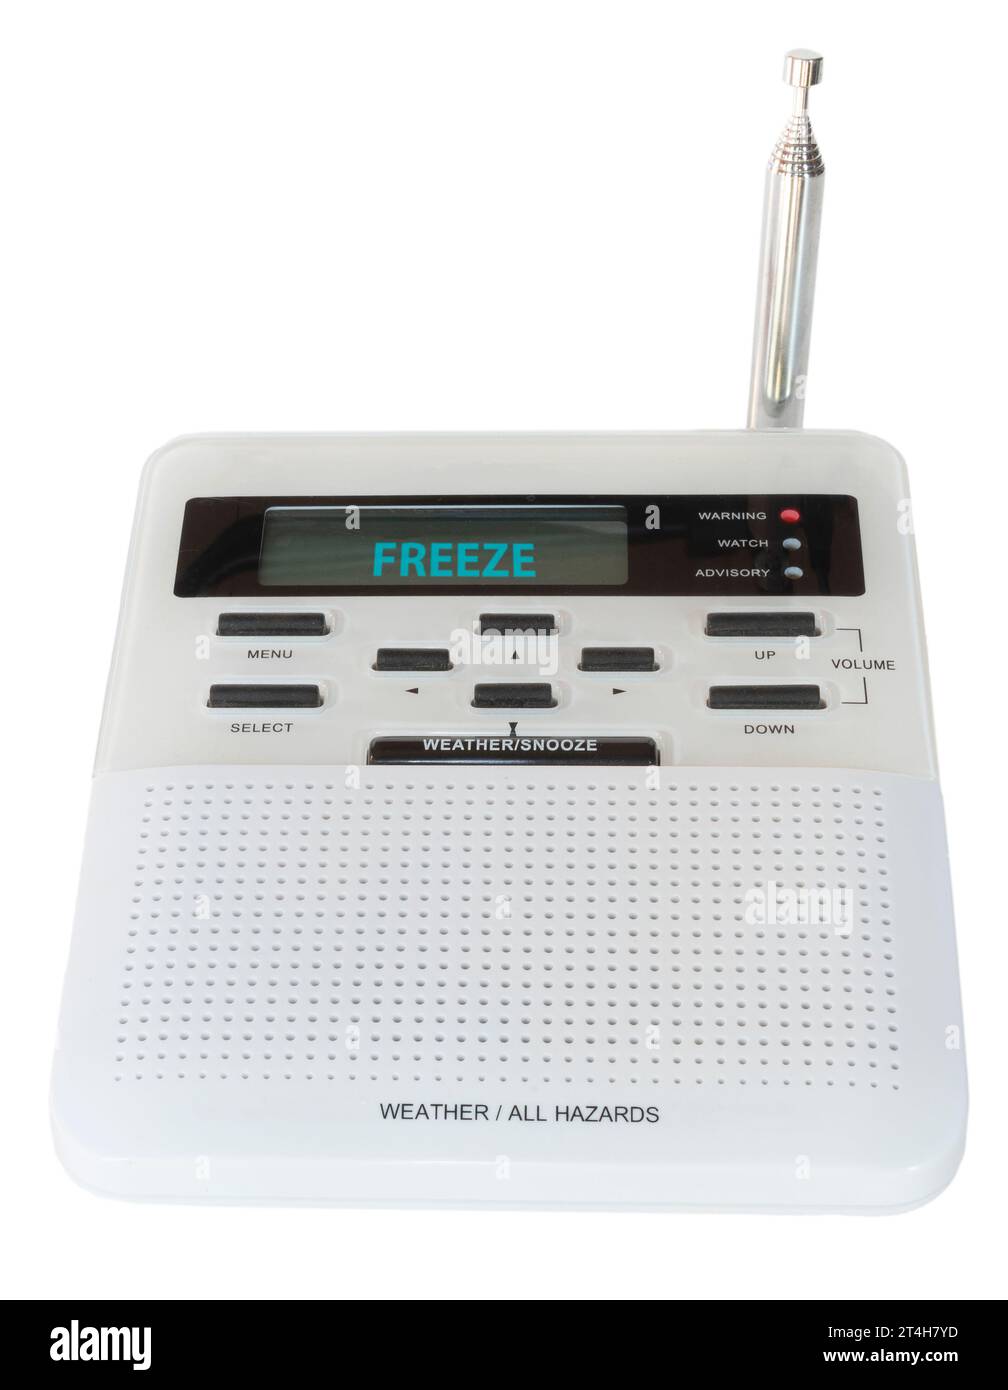 High tech weather radio that has sounded an alarm and it now showing a freeze warning for the immediate area. Stock Photo